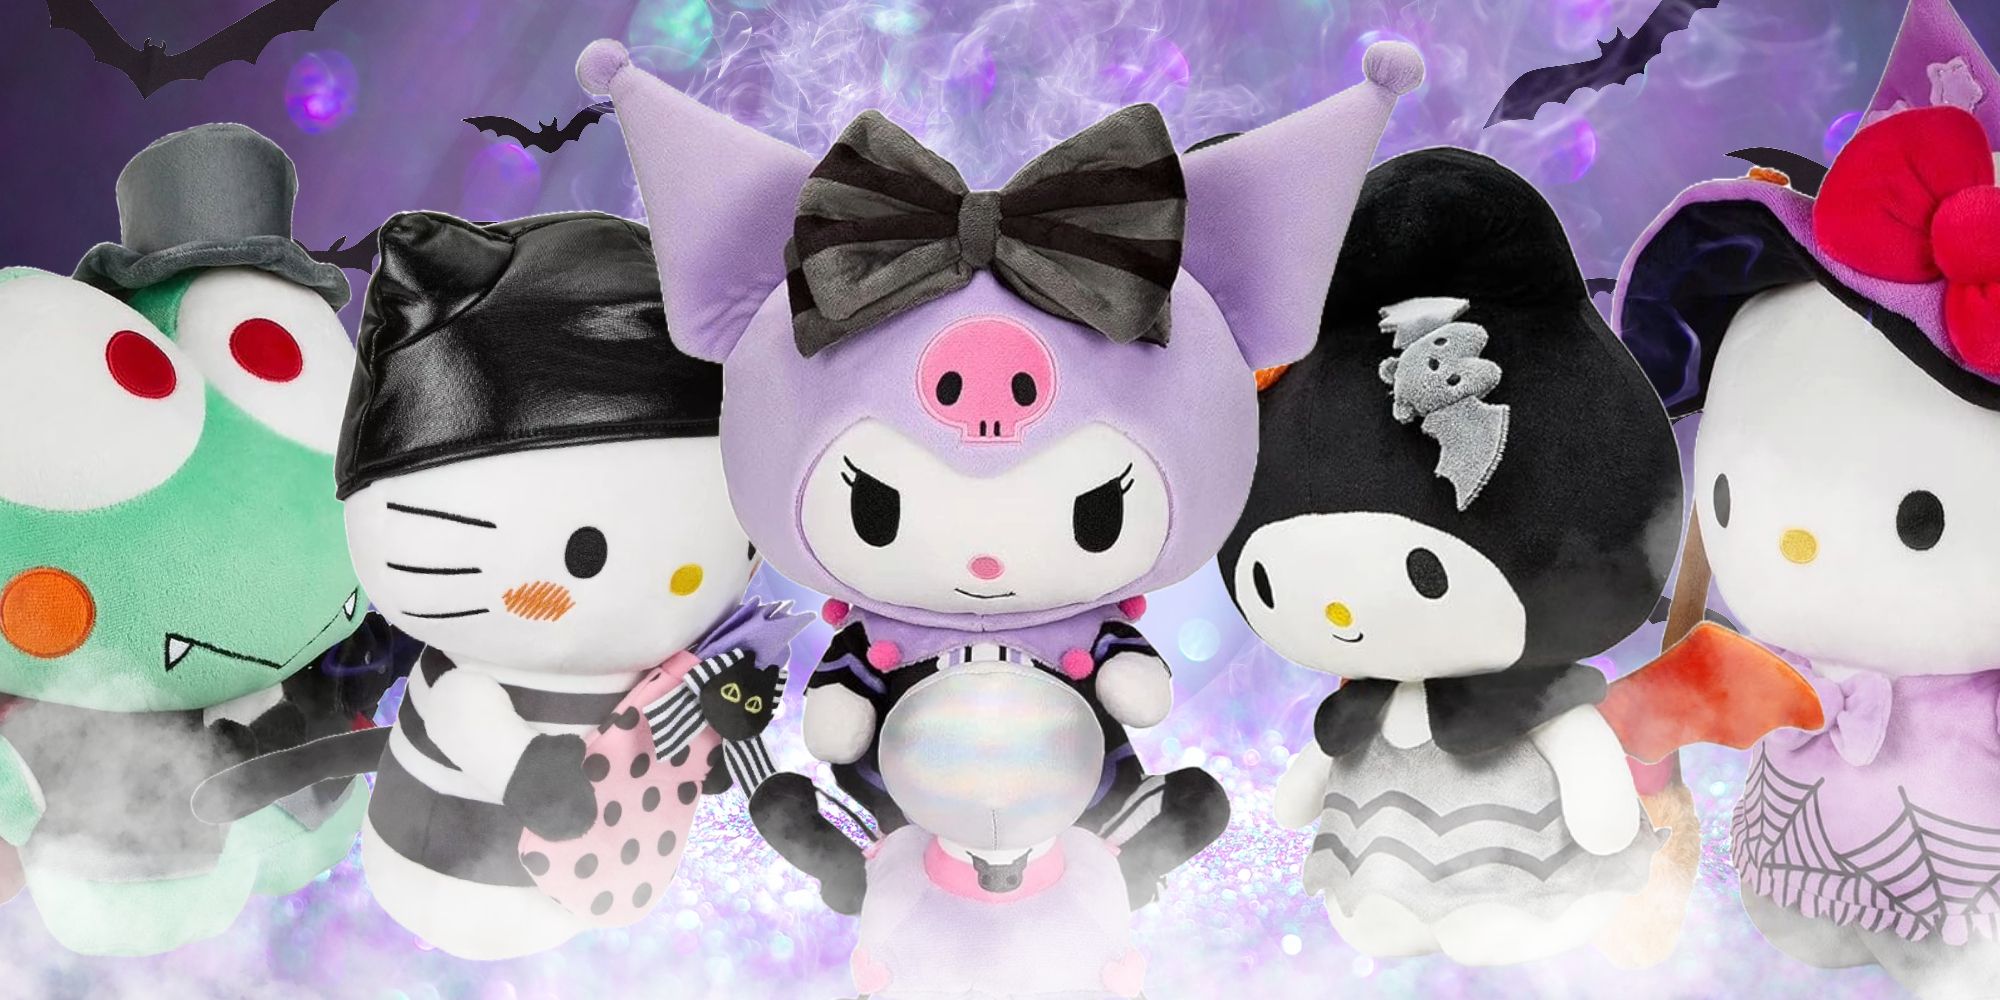 Kuromi, Hello Kitty, My Melody and Kerropi in plushie form are gathered together, all dressed in Halloween costumes.